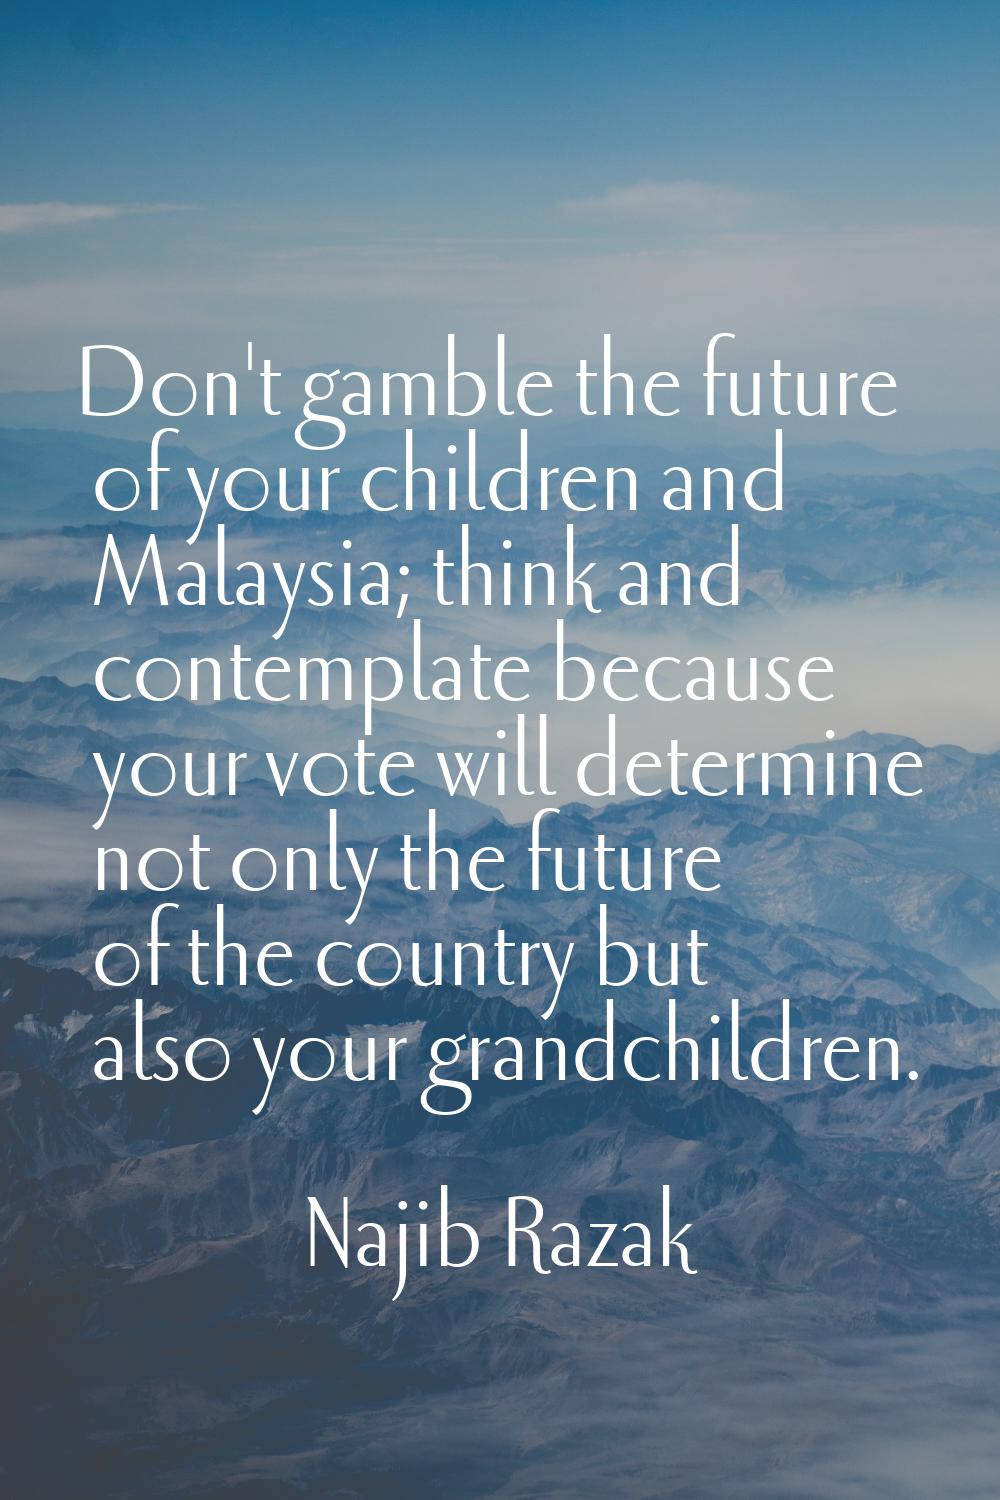 Don't gamble the future of your children and Malaysia; think and contemplate because your vote will